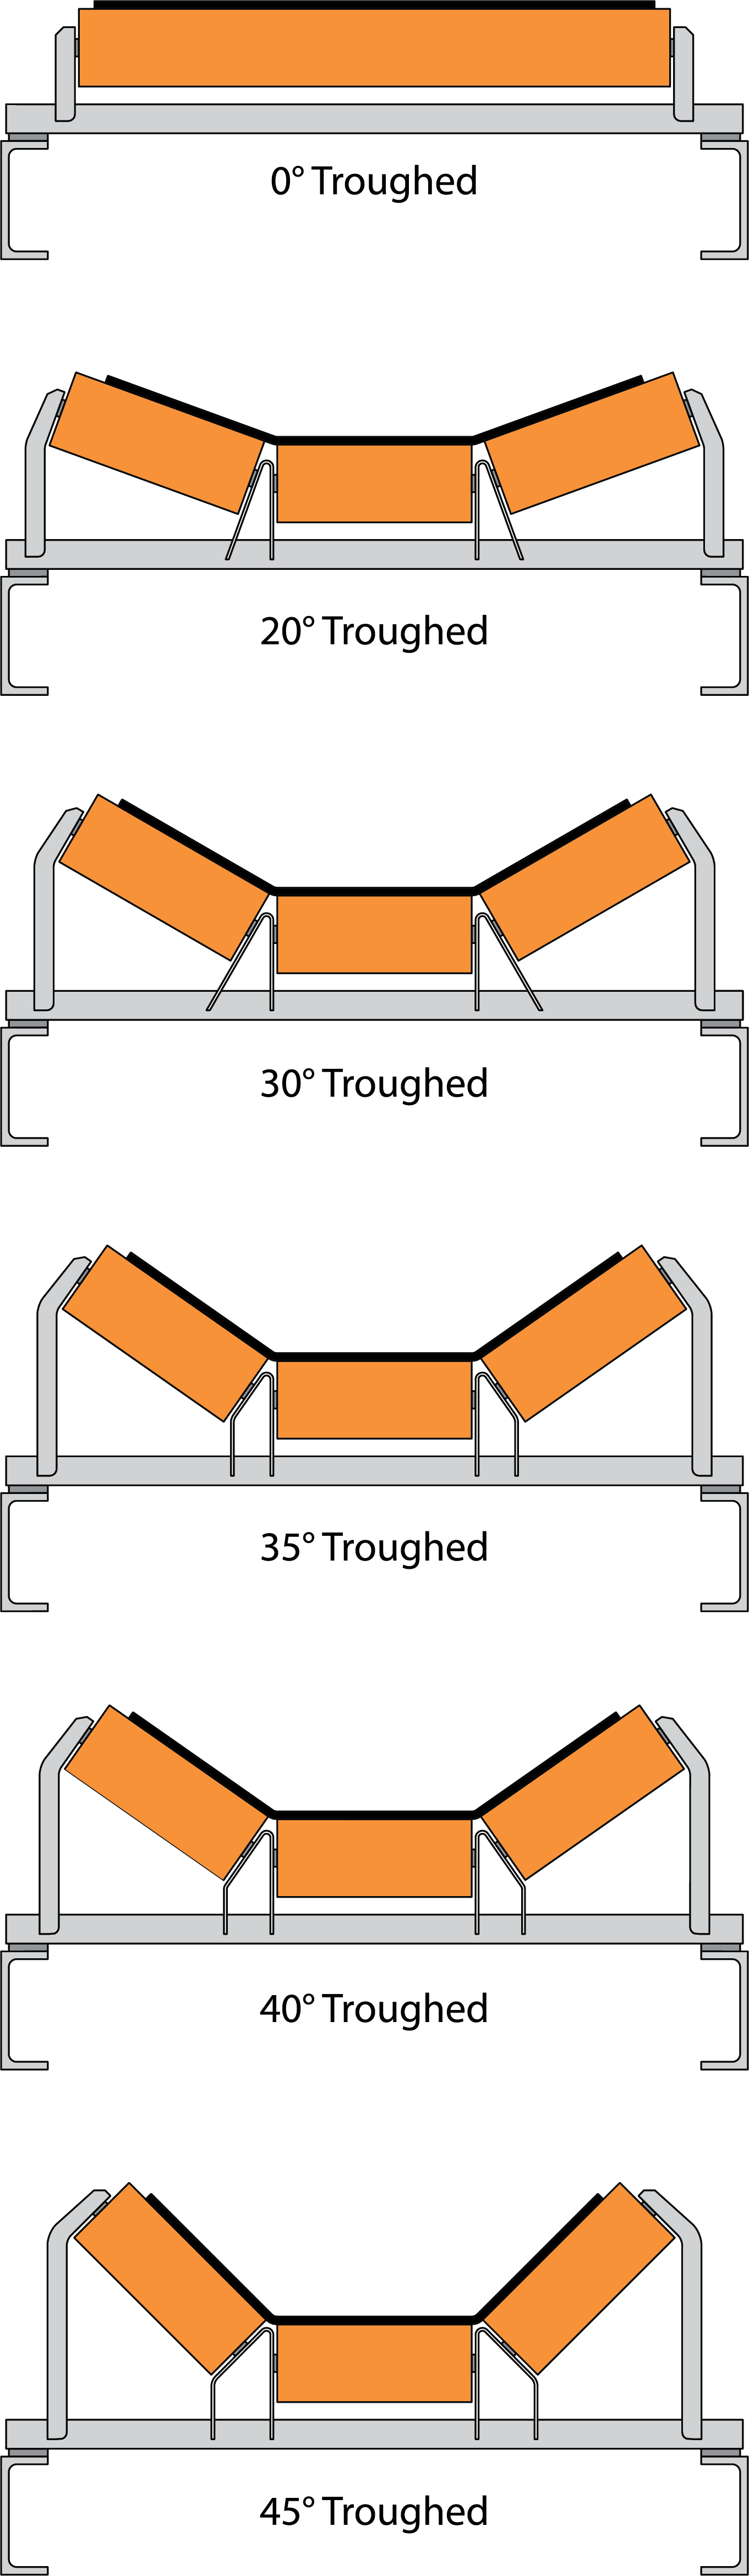 A series of illustrations showing a 0° troughed idler up to a 45° troughed idler.